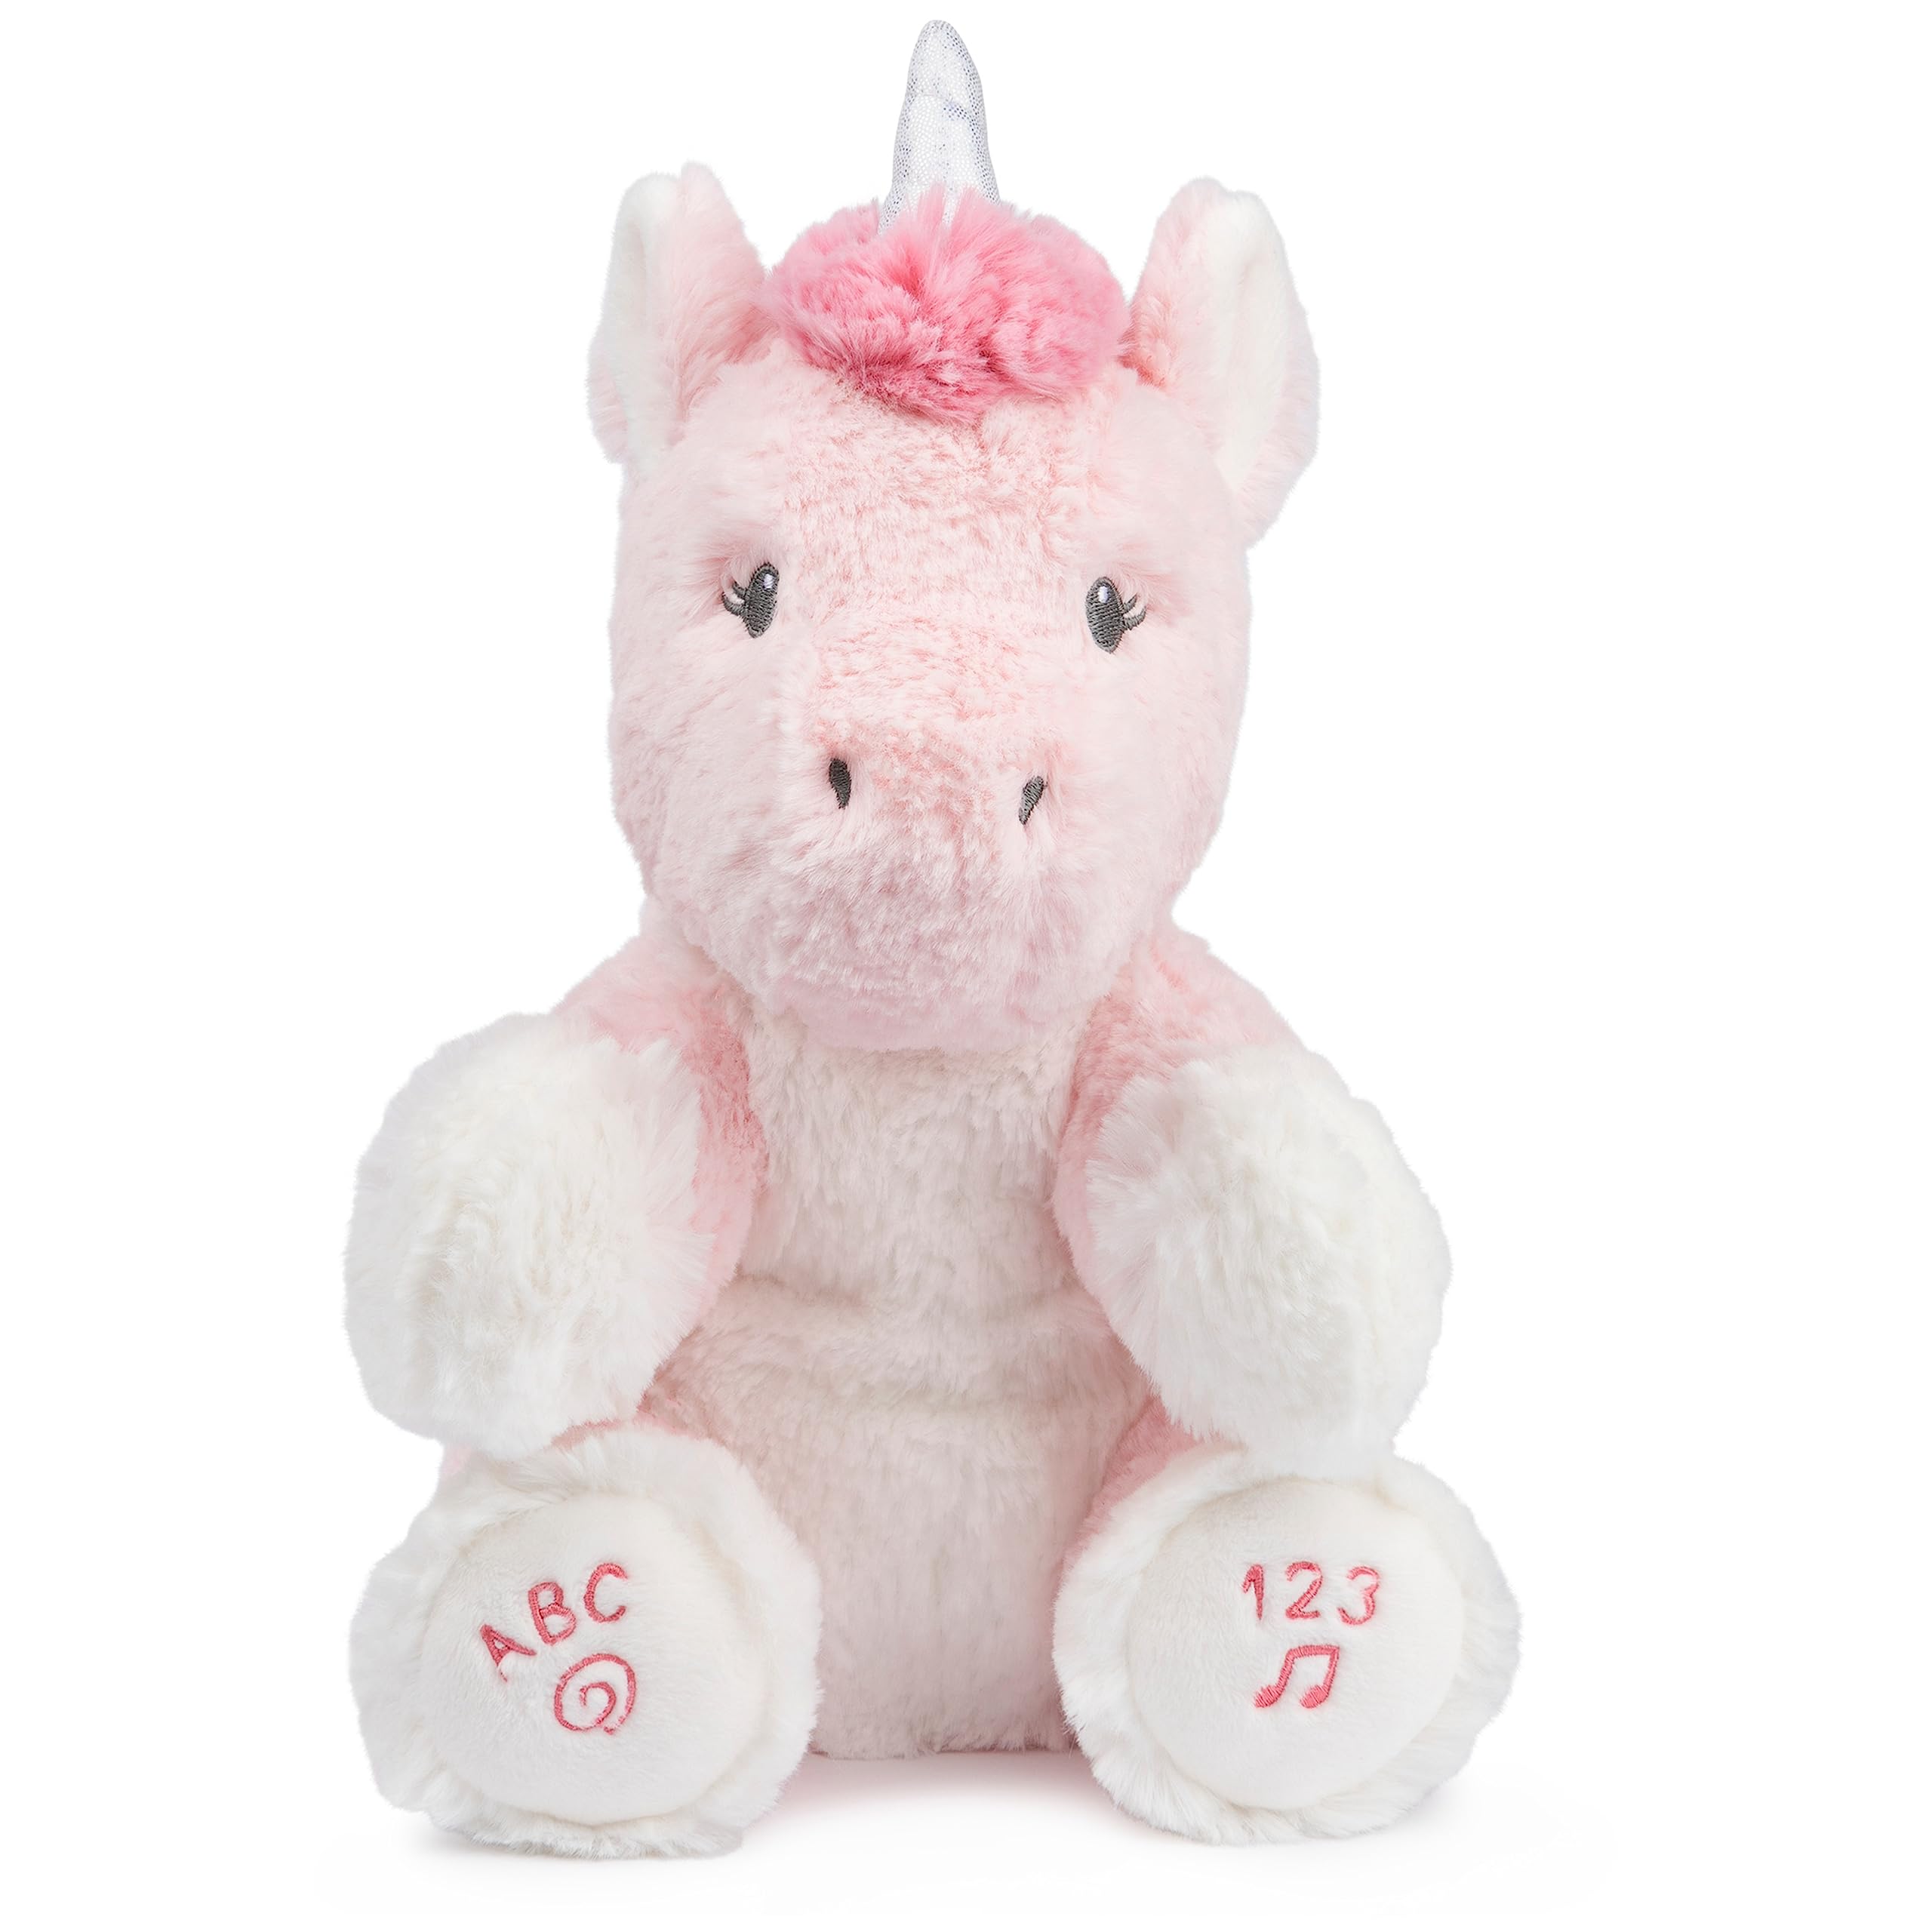 11" GUND Baby Alora The Unicorn Animated Plush, Singing Stuffed Animal Sensory Toy, Sings ABC Song and 123 Counting Song (Pink) $12.50 + Free Shipping w/ Prime or on $35+